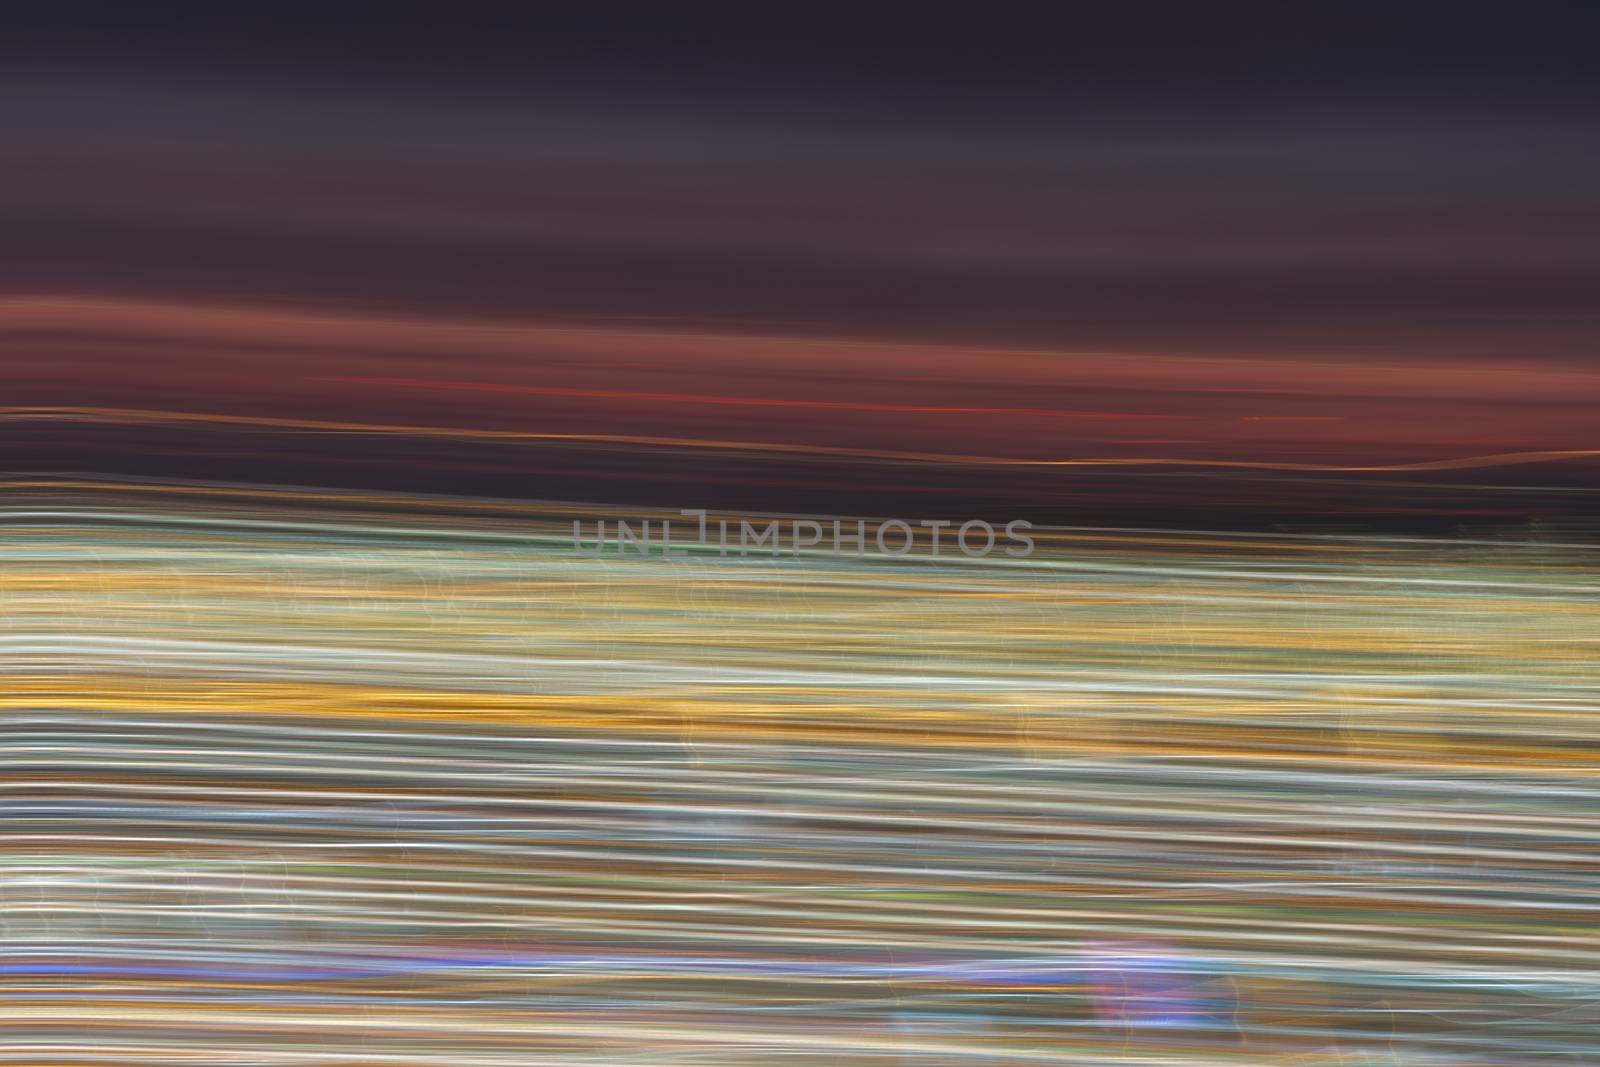 The night light colorful abstract background, light of night, sun set